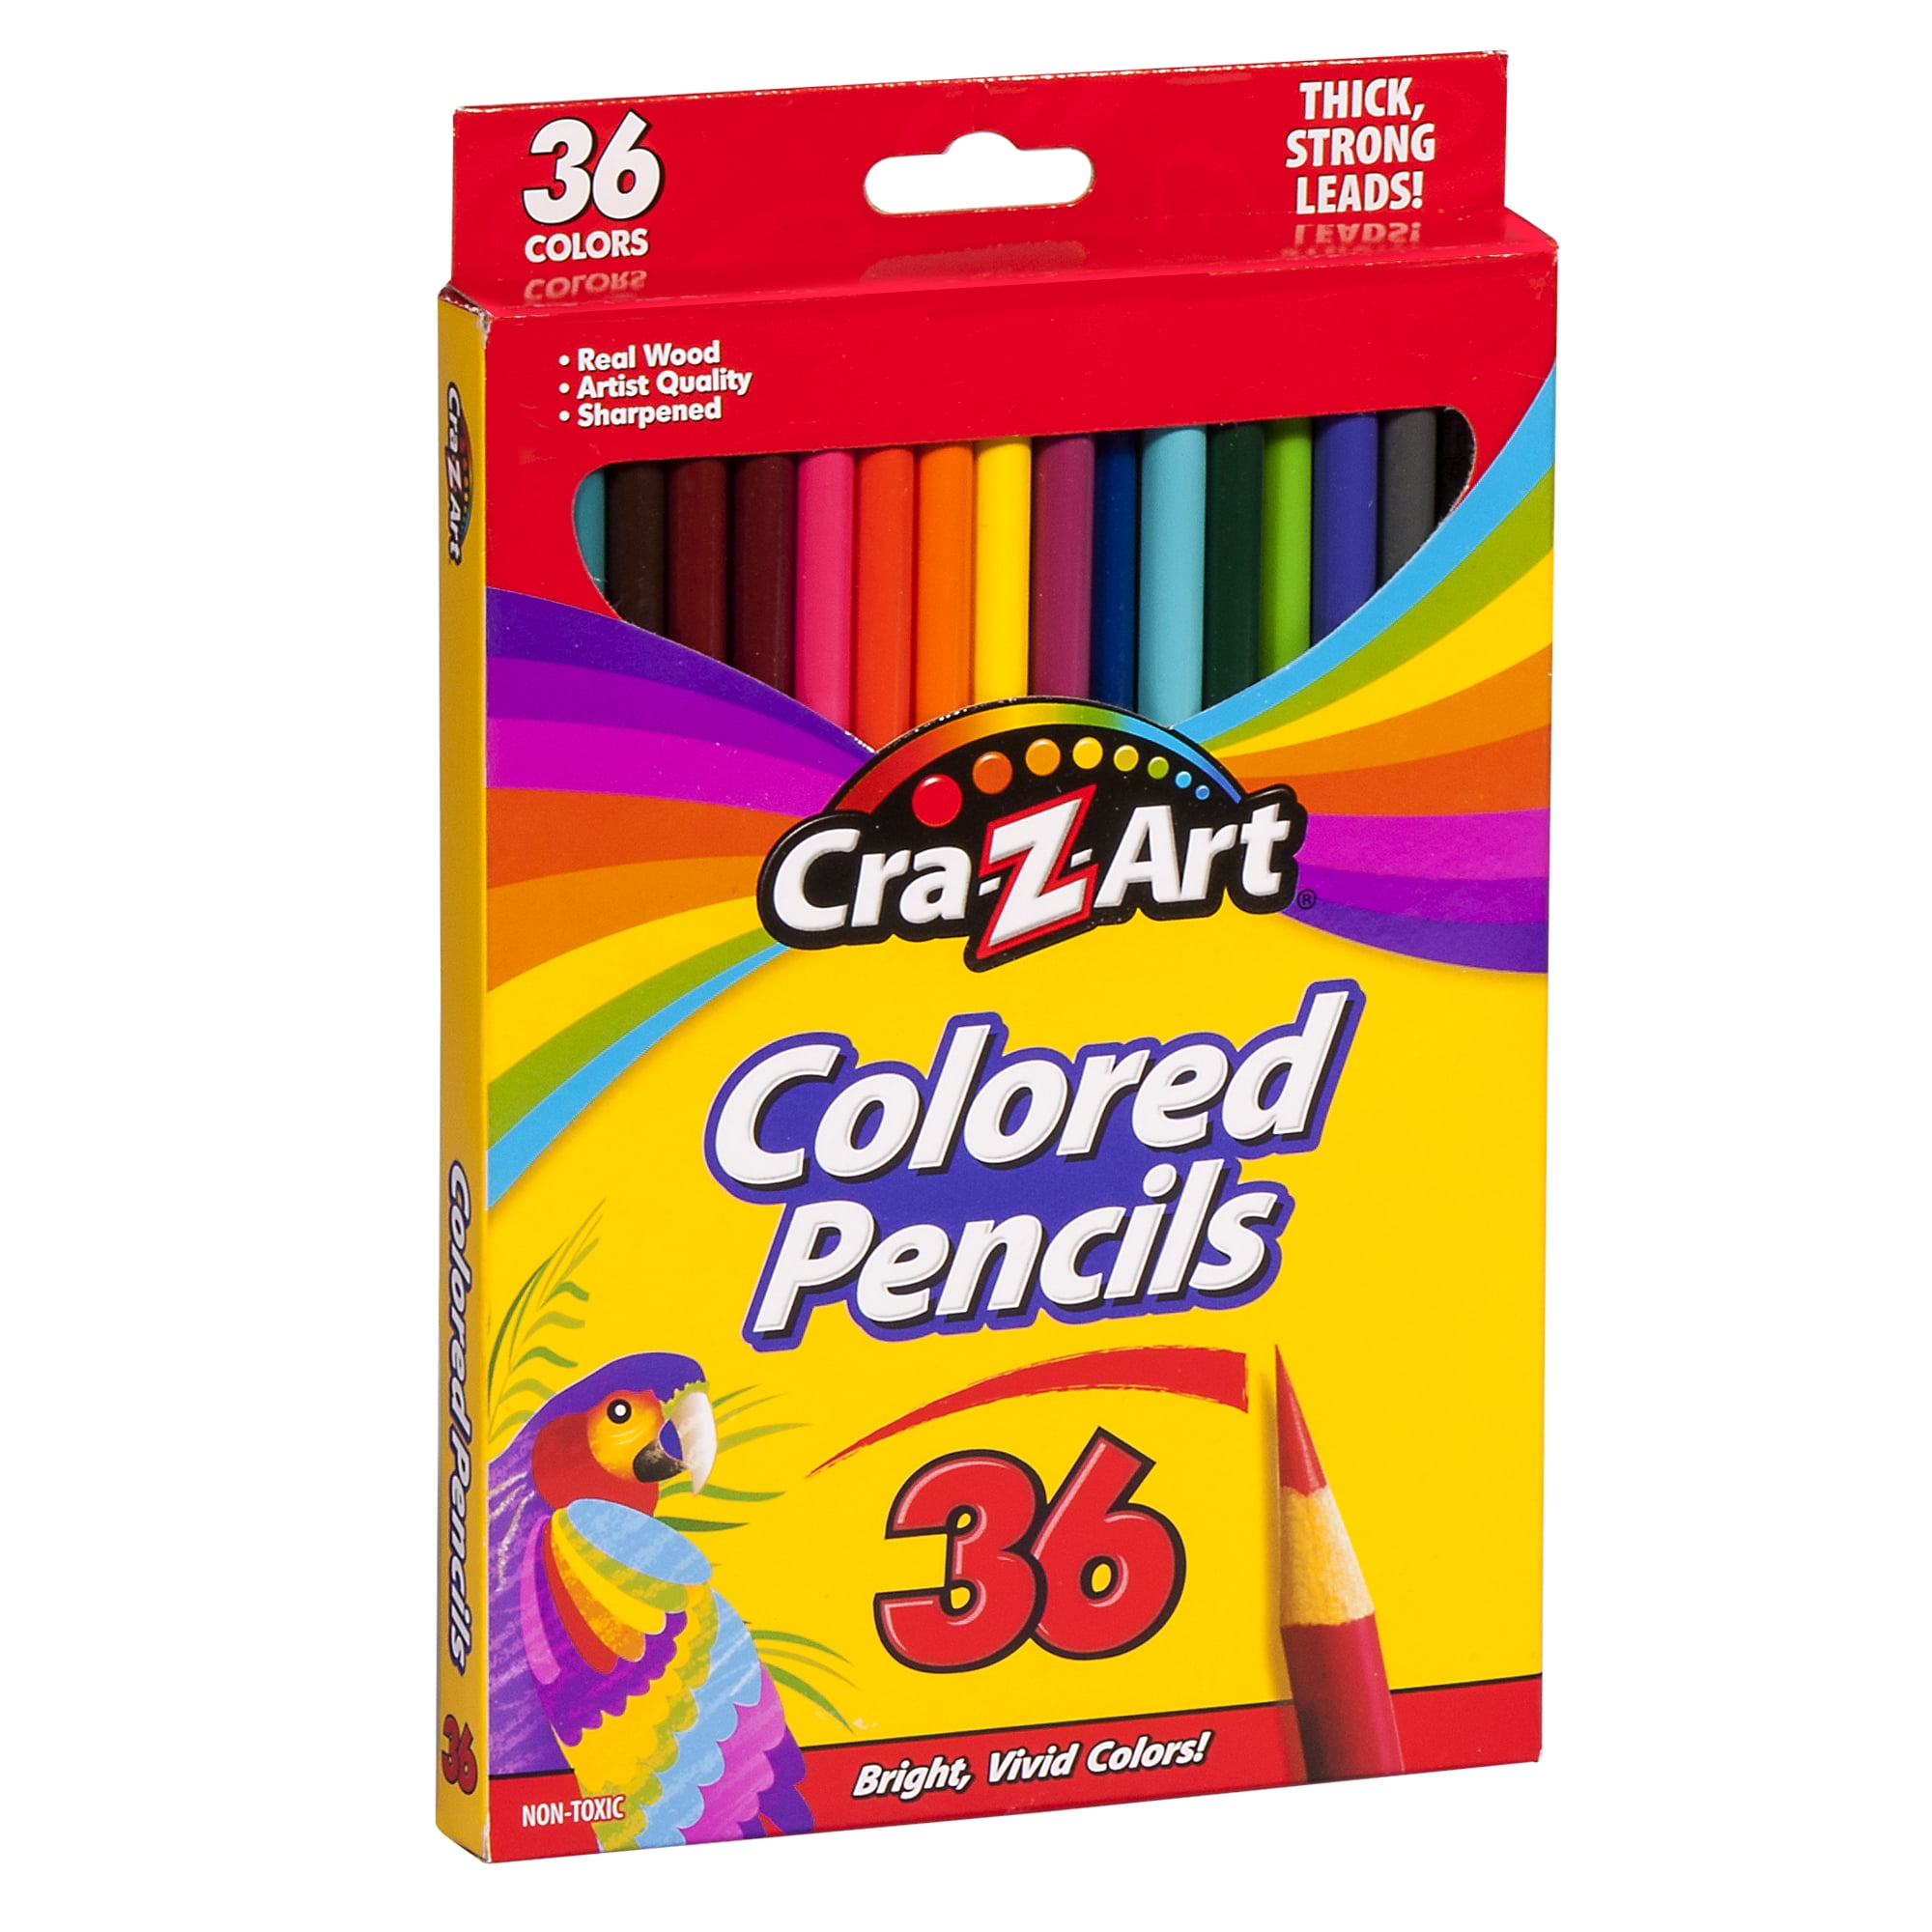  Hokusei Pencils KS-TY36C Colored Pencils, Easy to Use Colored  Pencils, 36 Colors : Office Products